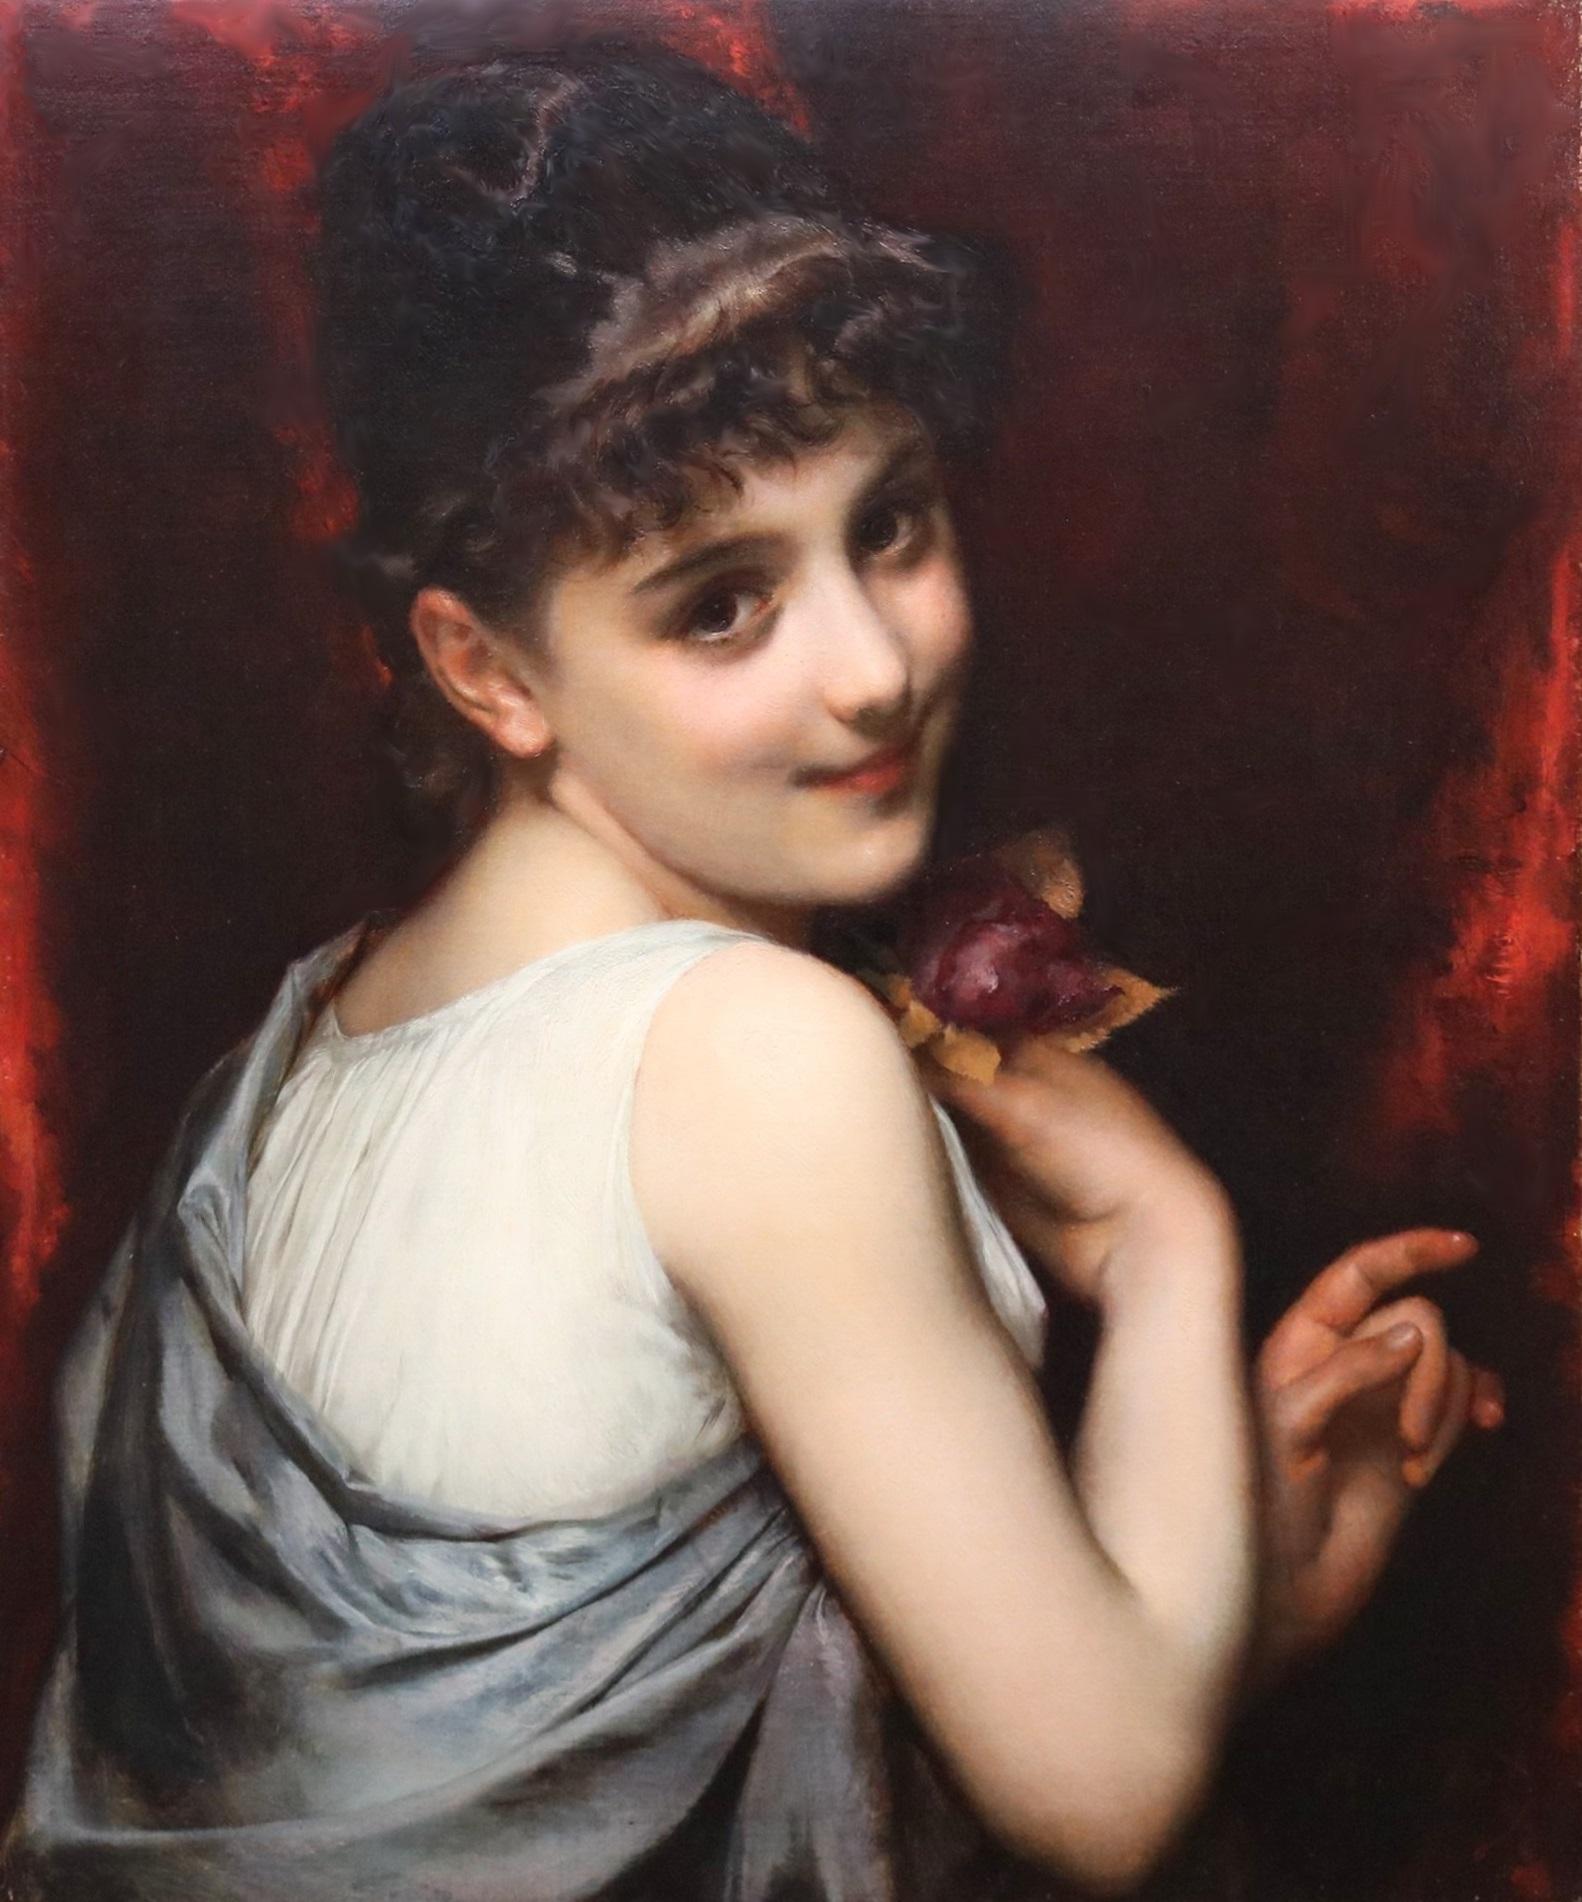 ‘Young Beauty holding a Red Rose’ by Étienne Adolphe Piot (1831-1910). The painting is signed by the artist and hangs in a fine quality gold metal leaf frame.

Academy Fine Paintings only offers artwork for sale in the finest condition it can be for